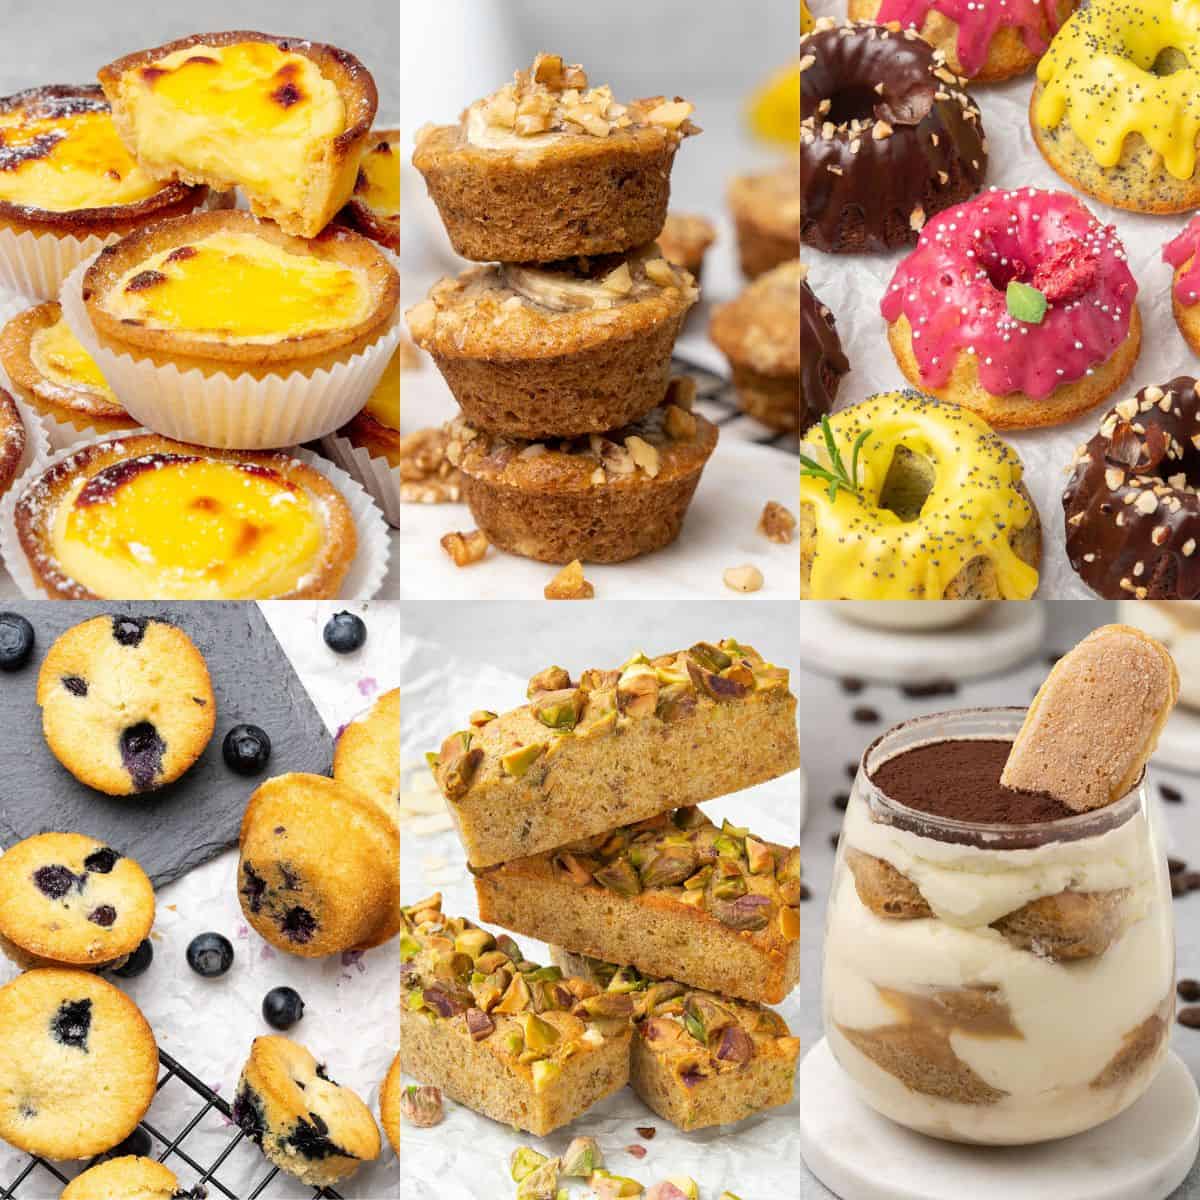 <p>The <strong><strong><a href="https://www.spatuladesserts.com/mini-desserts/">Best Mini Desserts</a></strong></strong> to bake when size matters. Whether you're looking for petit fours to serve after dinner or putting together a dessert table of bite-sized treats, perhaps looking for easy bite-size desserts for parties, we have all the mini dessert recipes you need.</p> <p><strong>Go to the recipes: <a href="https://www.spatuladesserts.com/mini-desserts/">Best Mini Desserts</a></strong></p> <p><strong>This article was first published as <a href="https://www.spatuladesserts.com/cupcake-recipes/">Best Cupcake Recipes</a> at <a href="https://www.spatuladesserts.com/">Spatula Desserts</a>.</strong></p>